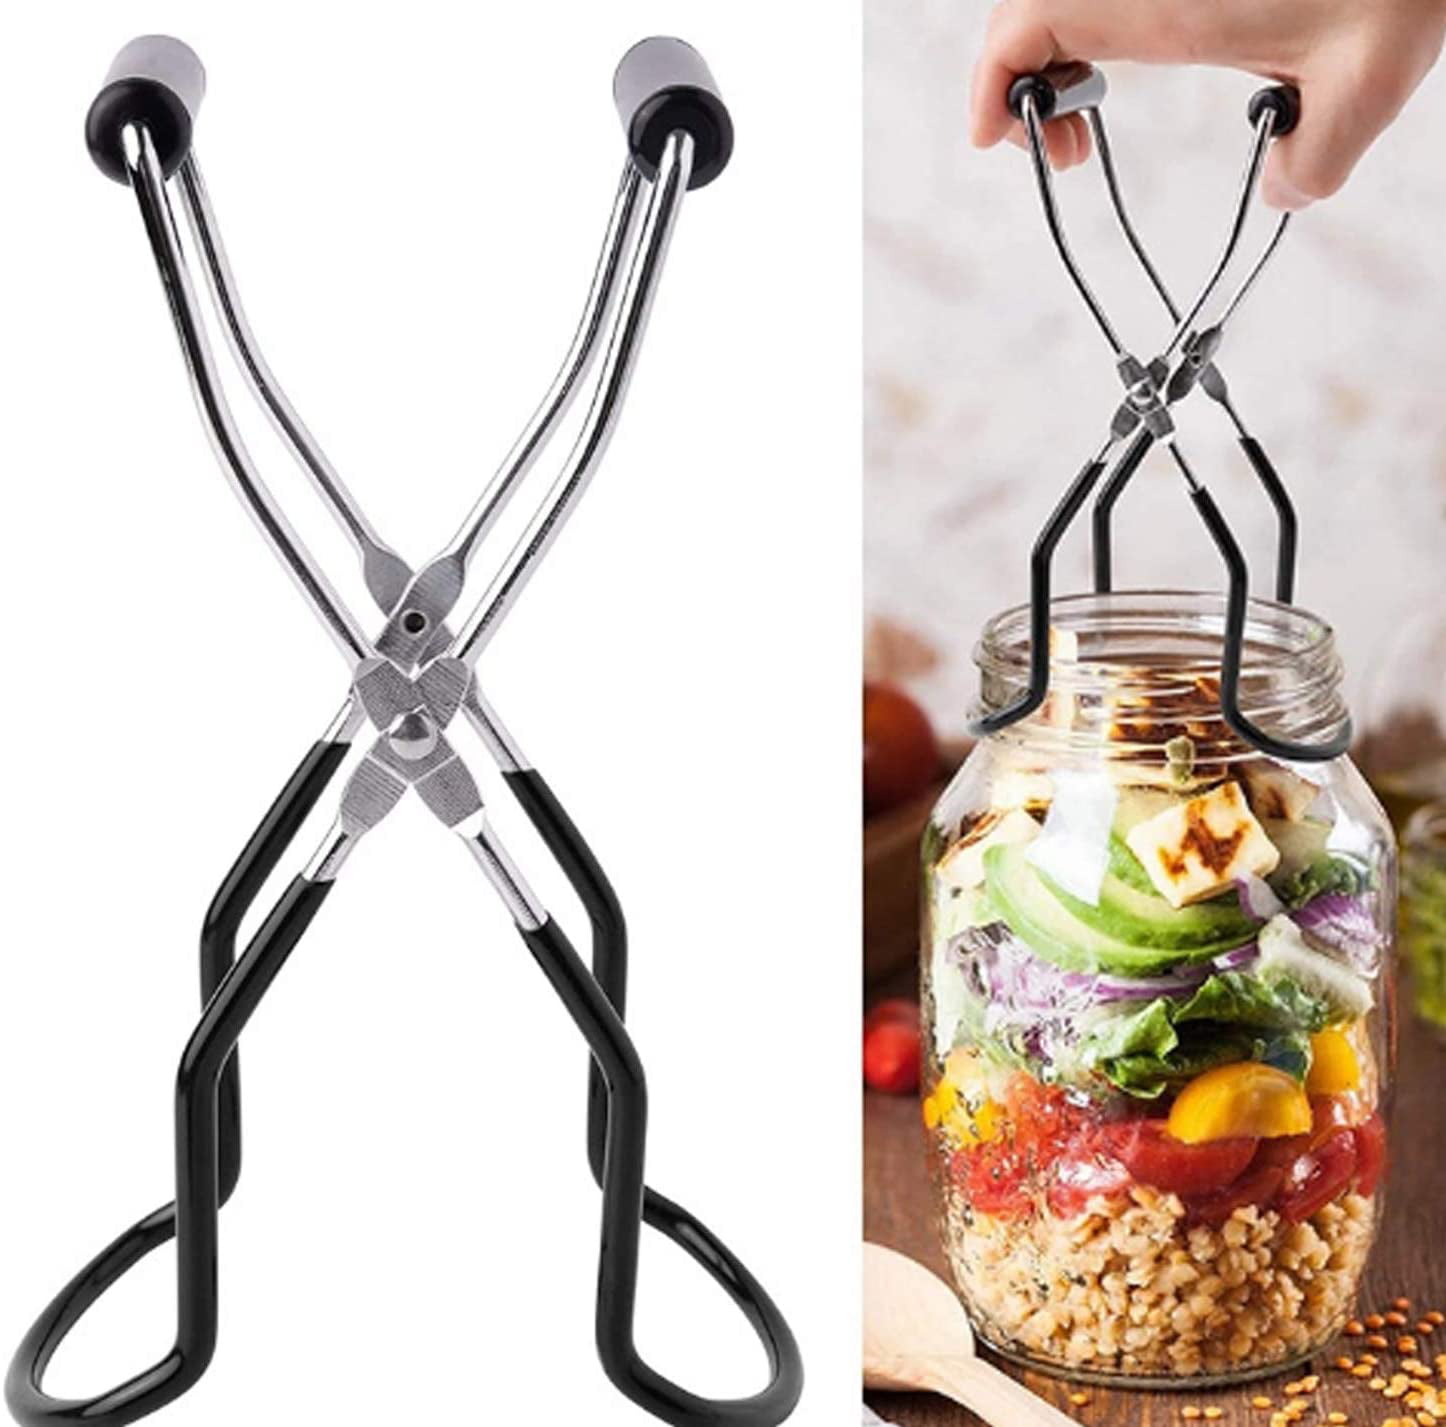 Canning Jar Lifter Tongs Premium Stainless Steel Chef Canning Jar Lifter with Secure Grip Handle for Safely remove any size canning jar from boiling water 